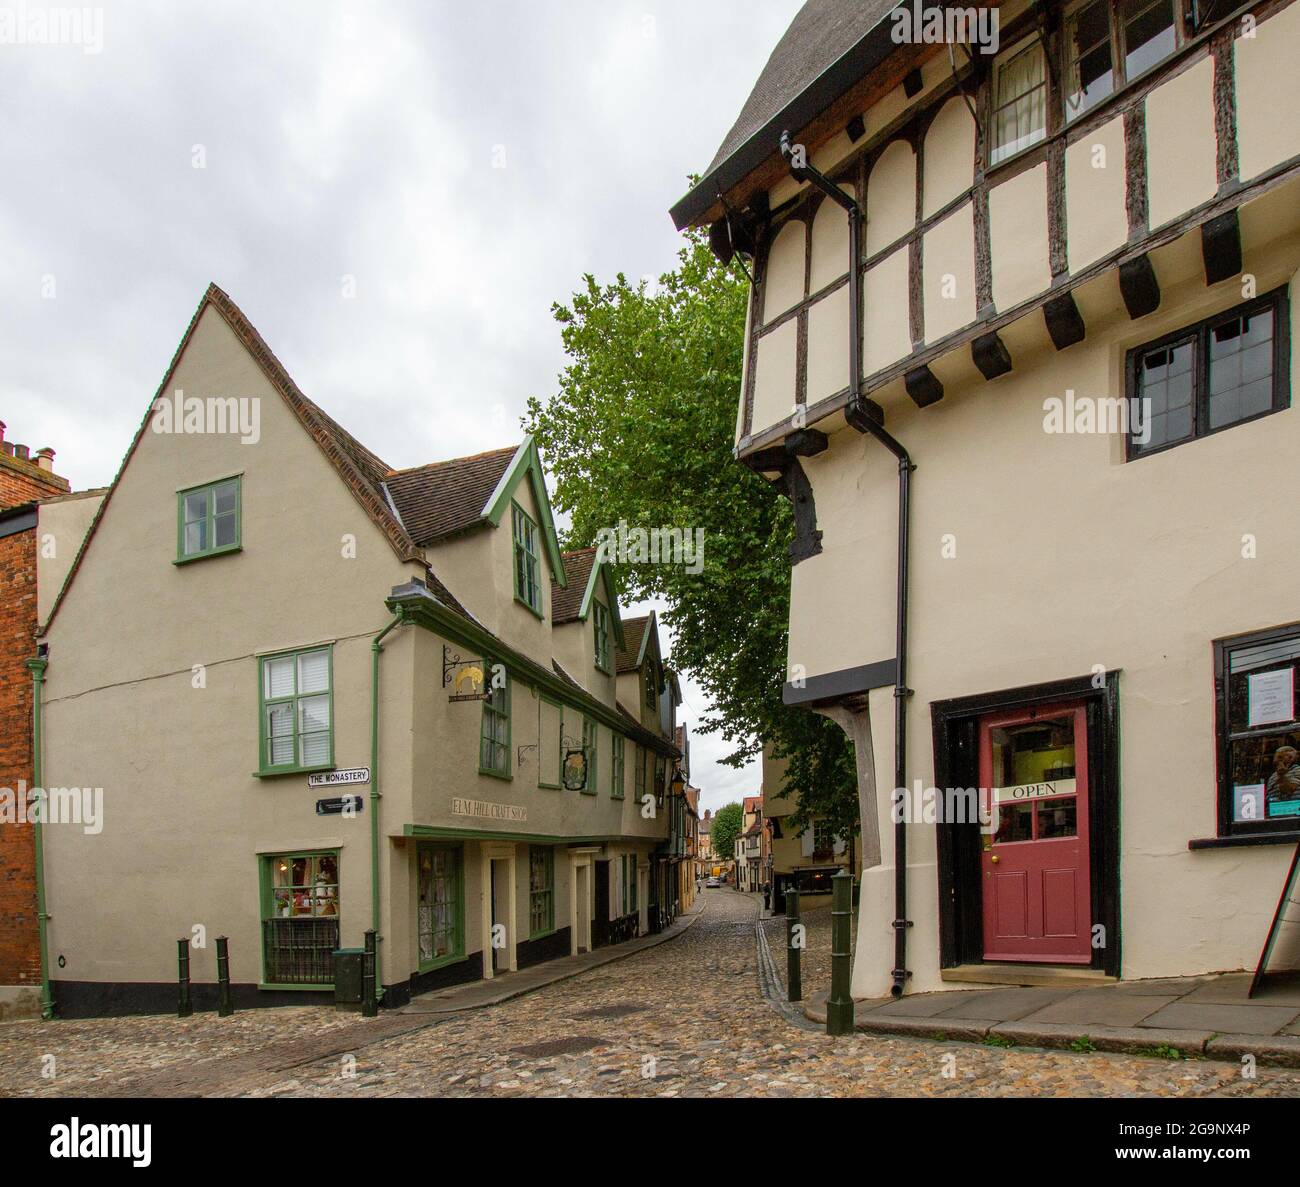 NORWICH, UNITED KINGDOM - Aug 08, 2016: A scenic viof the Elm Hill cobbled lane with buildings in Norwich, Norfolk Stock Photo